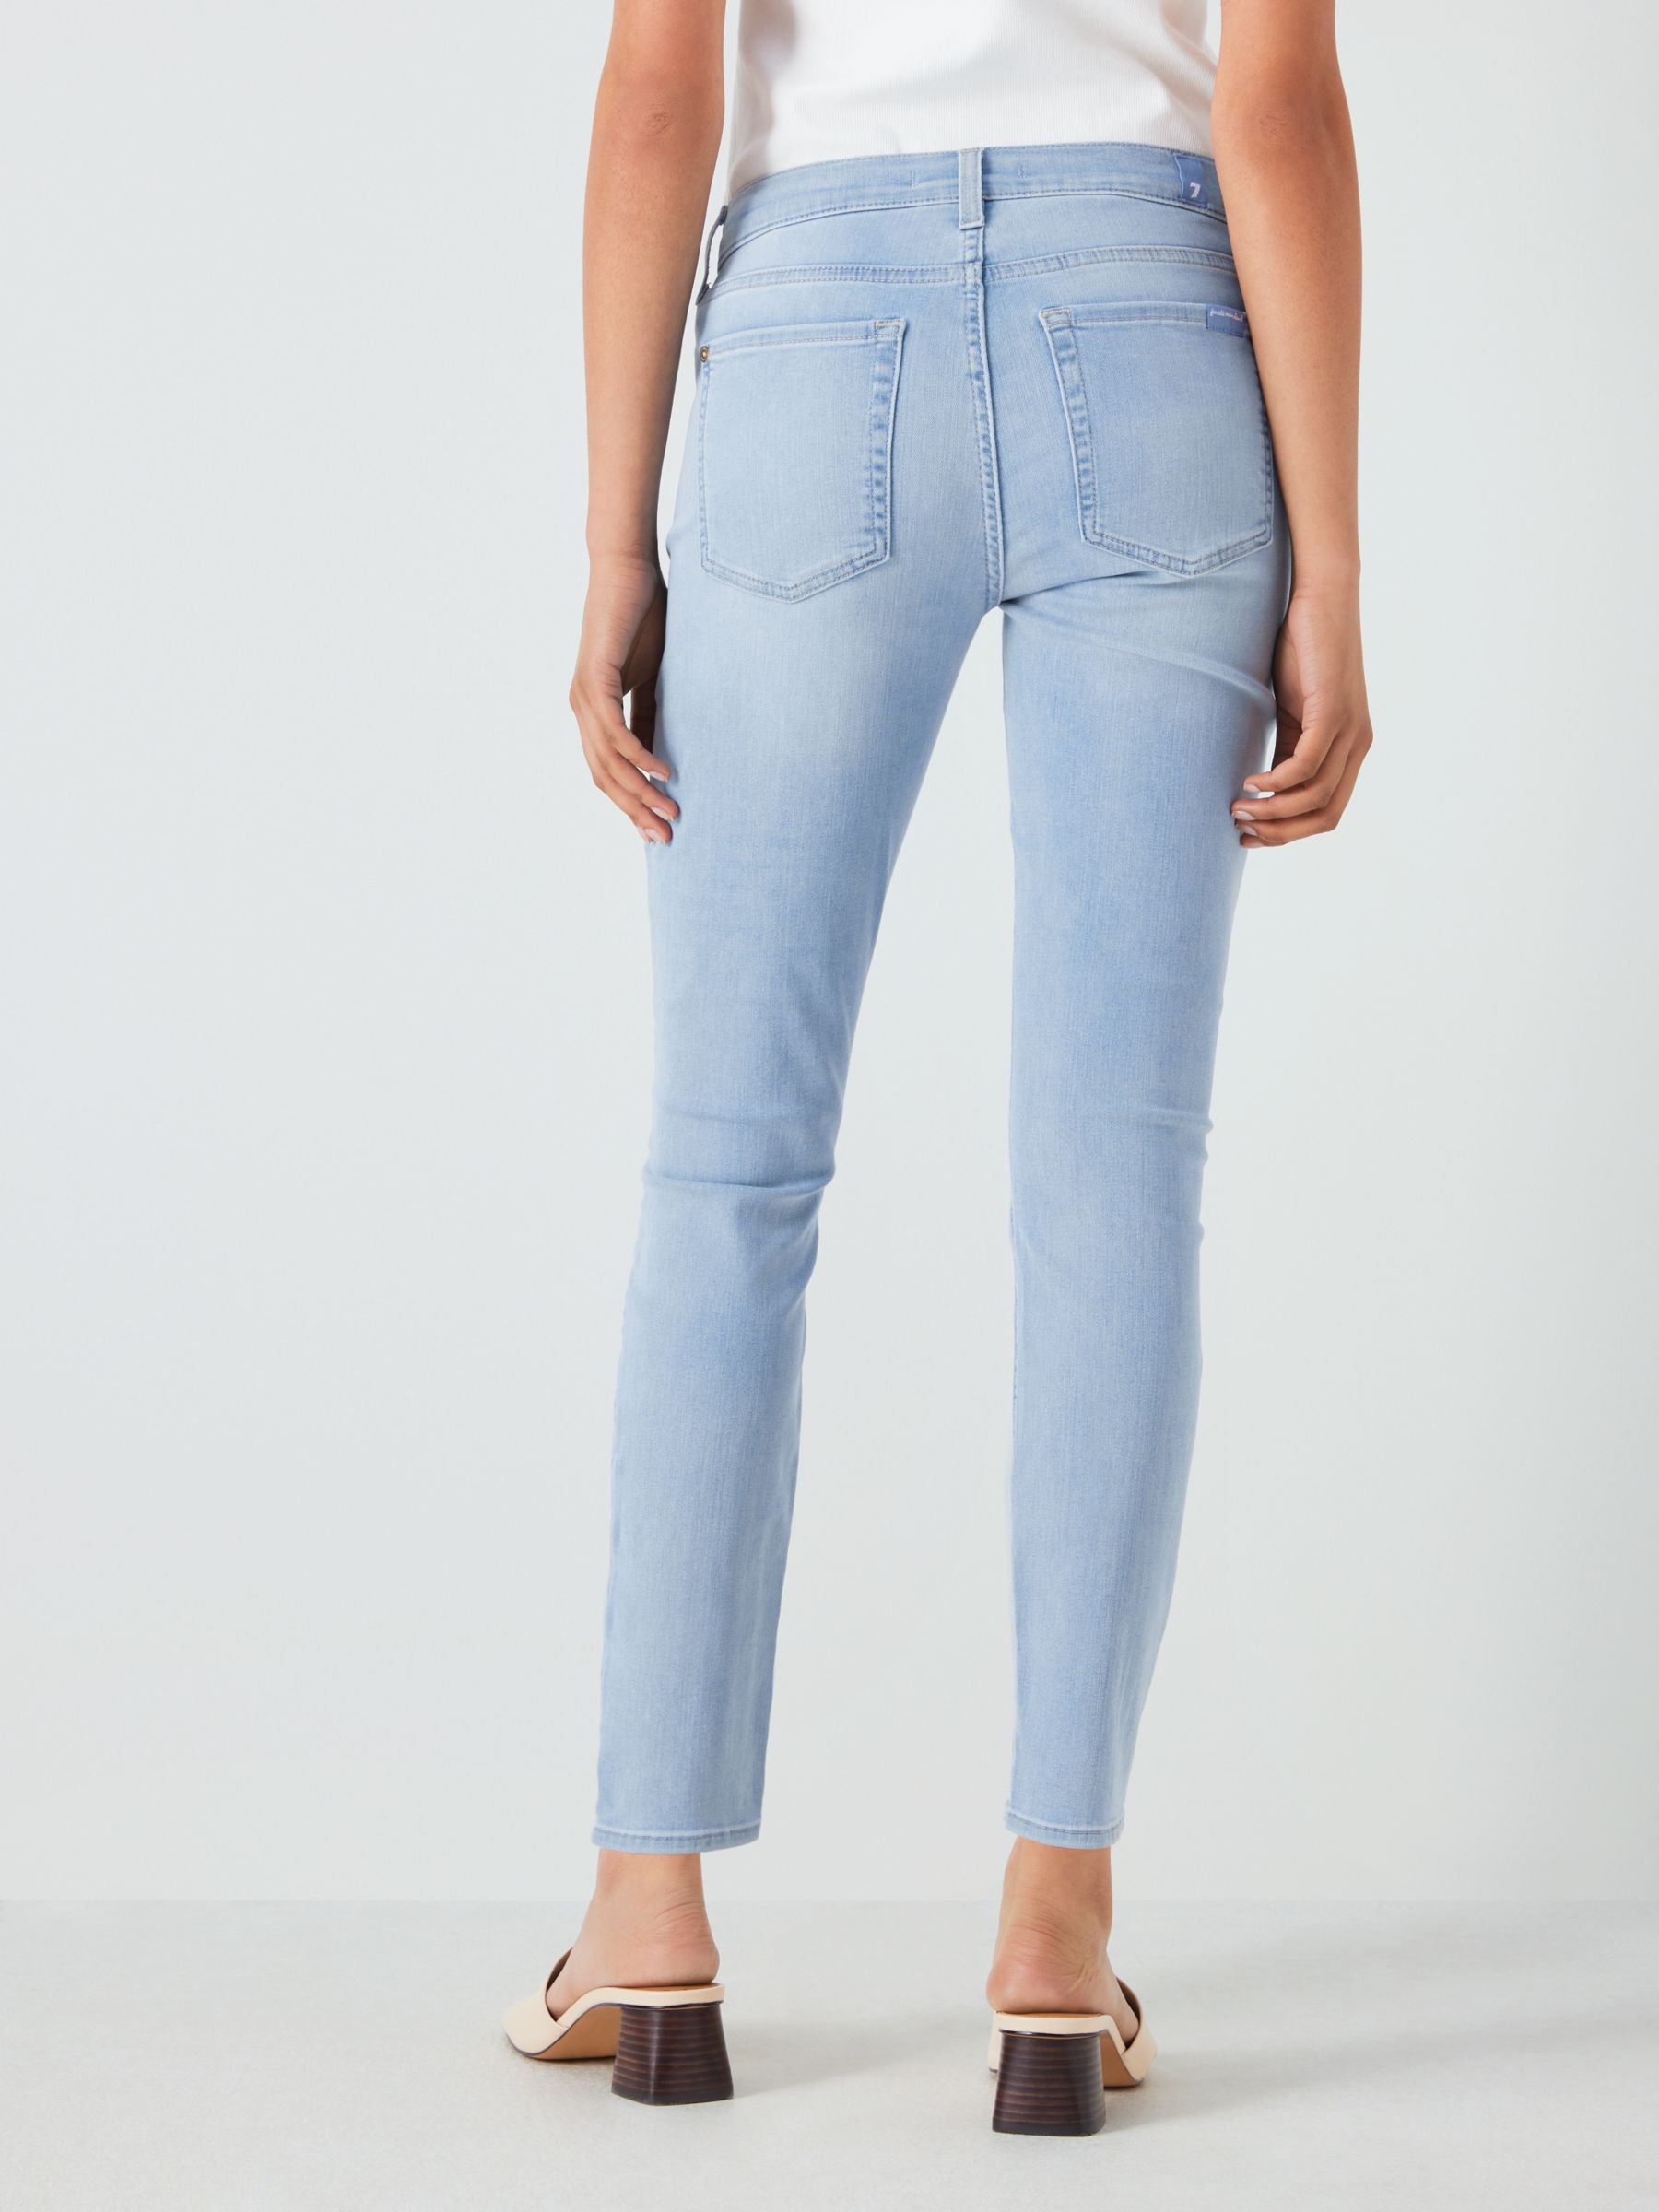 Buy 7 For All Mankind Skinny B(Air) Jeans Online at johnlewis.com